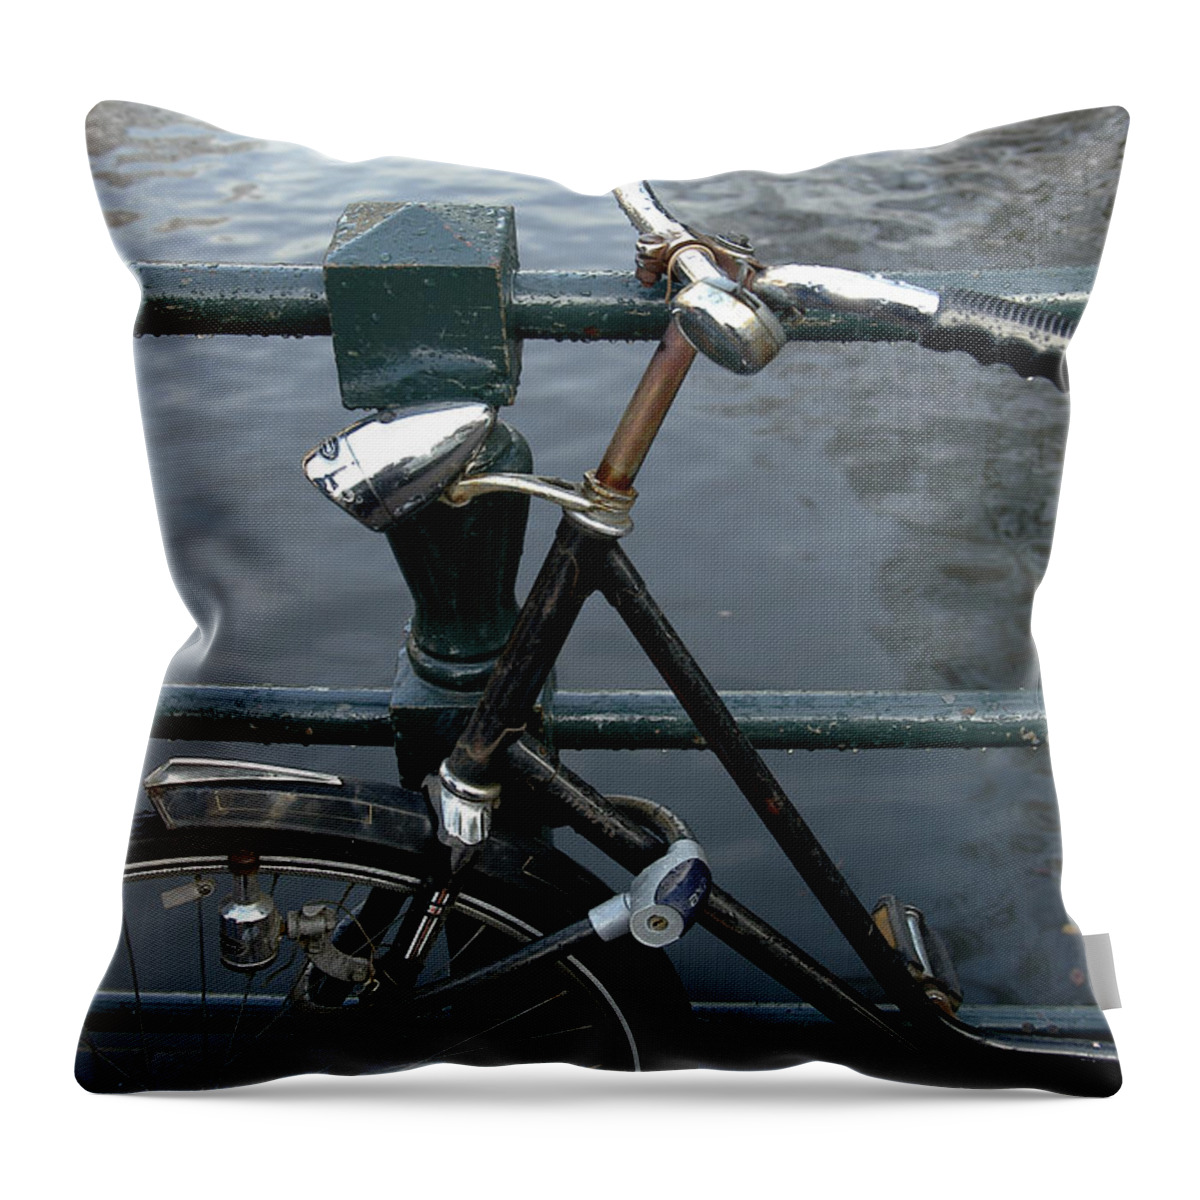 Landscape Amsterdam Red Light District Bicycle Throw Pillow featuring the photograph Dnrh1104 by Henry Butz